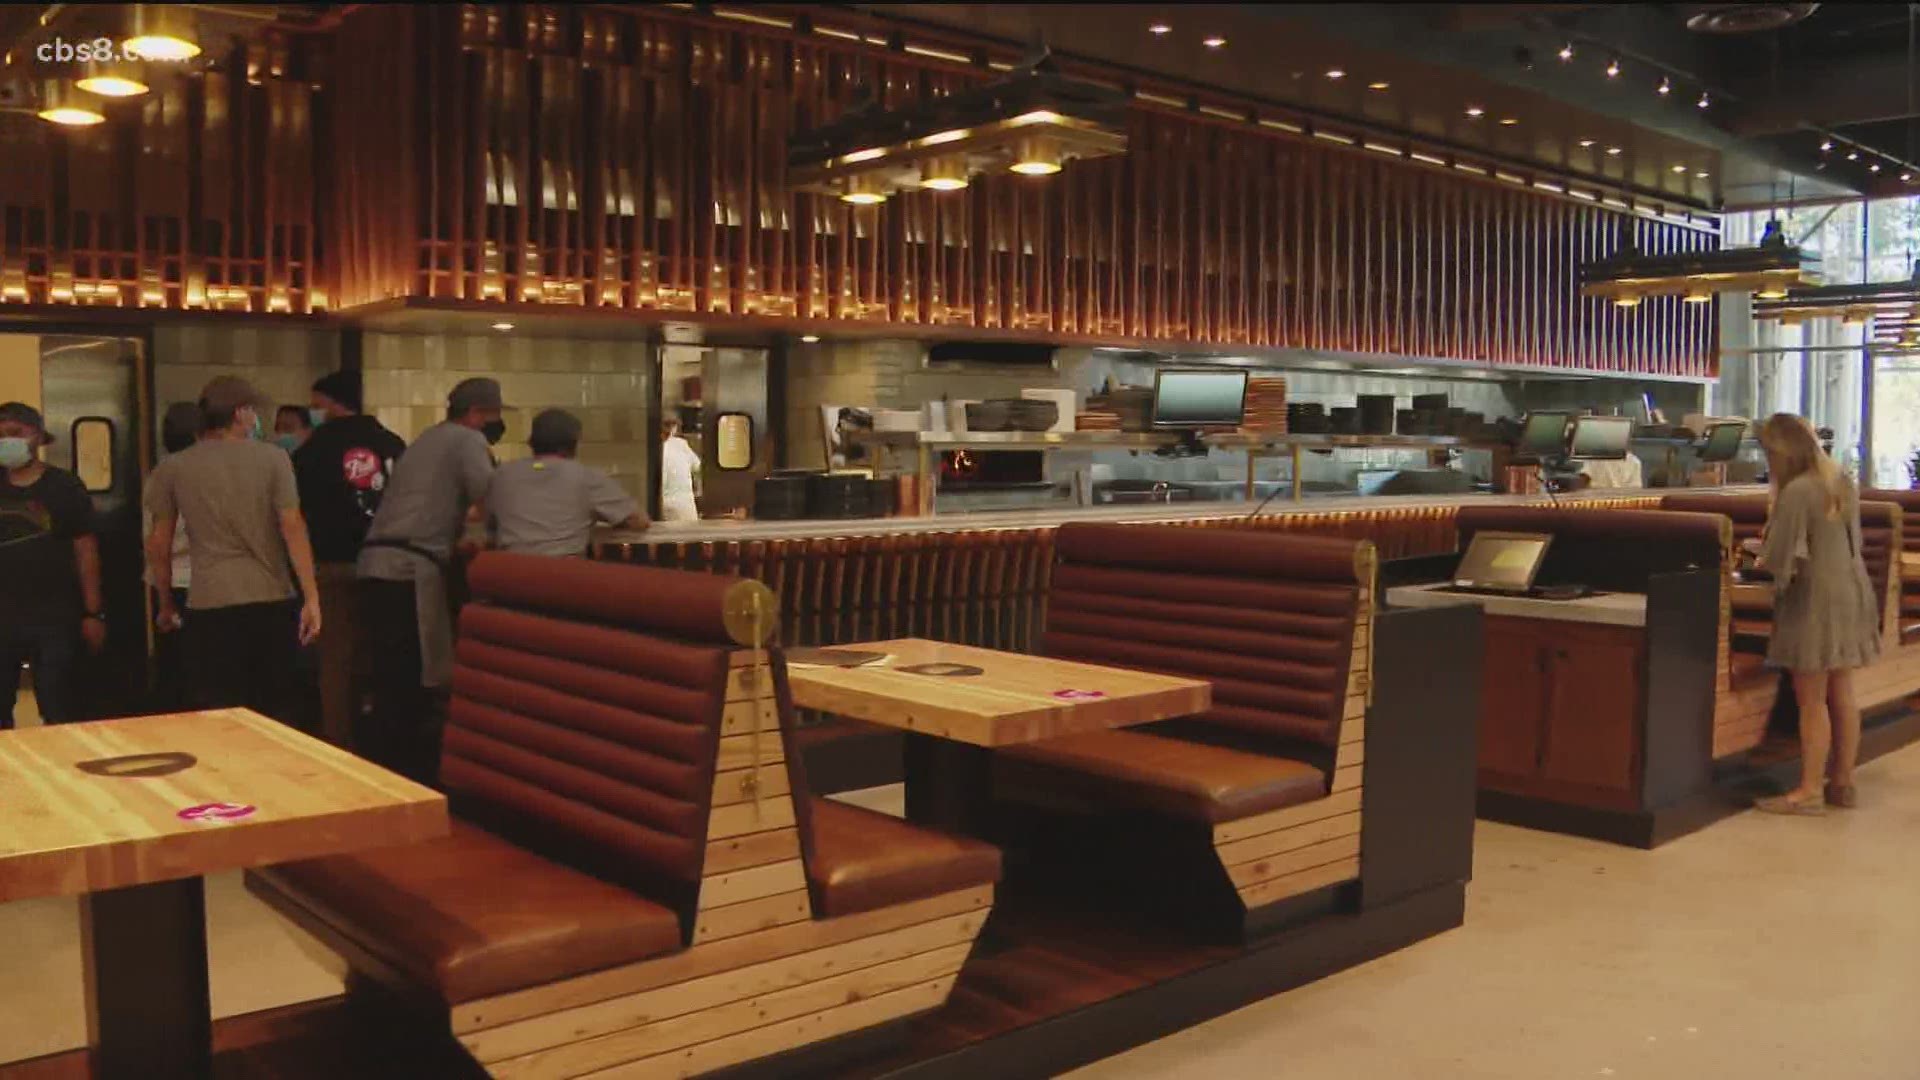 News 8's Abbie Alford shares how Puesto's newest restaurant in Mission Valley is opening amid the turmoil.